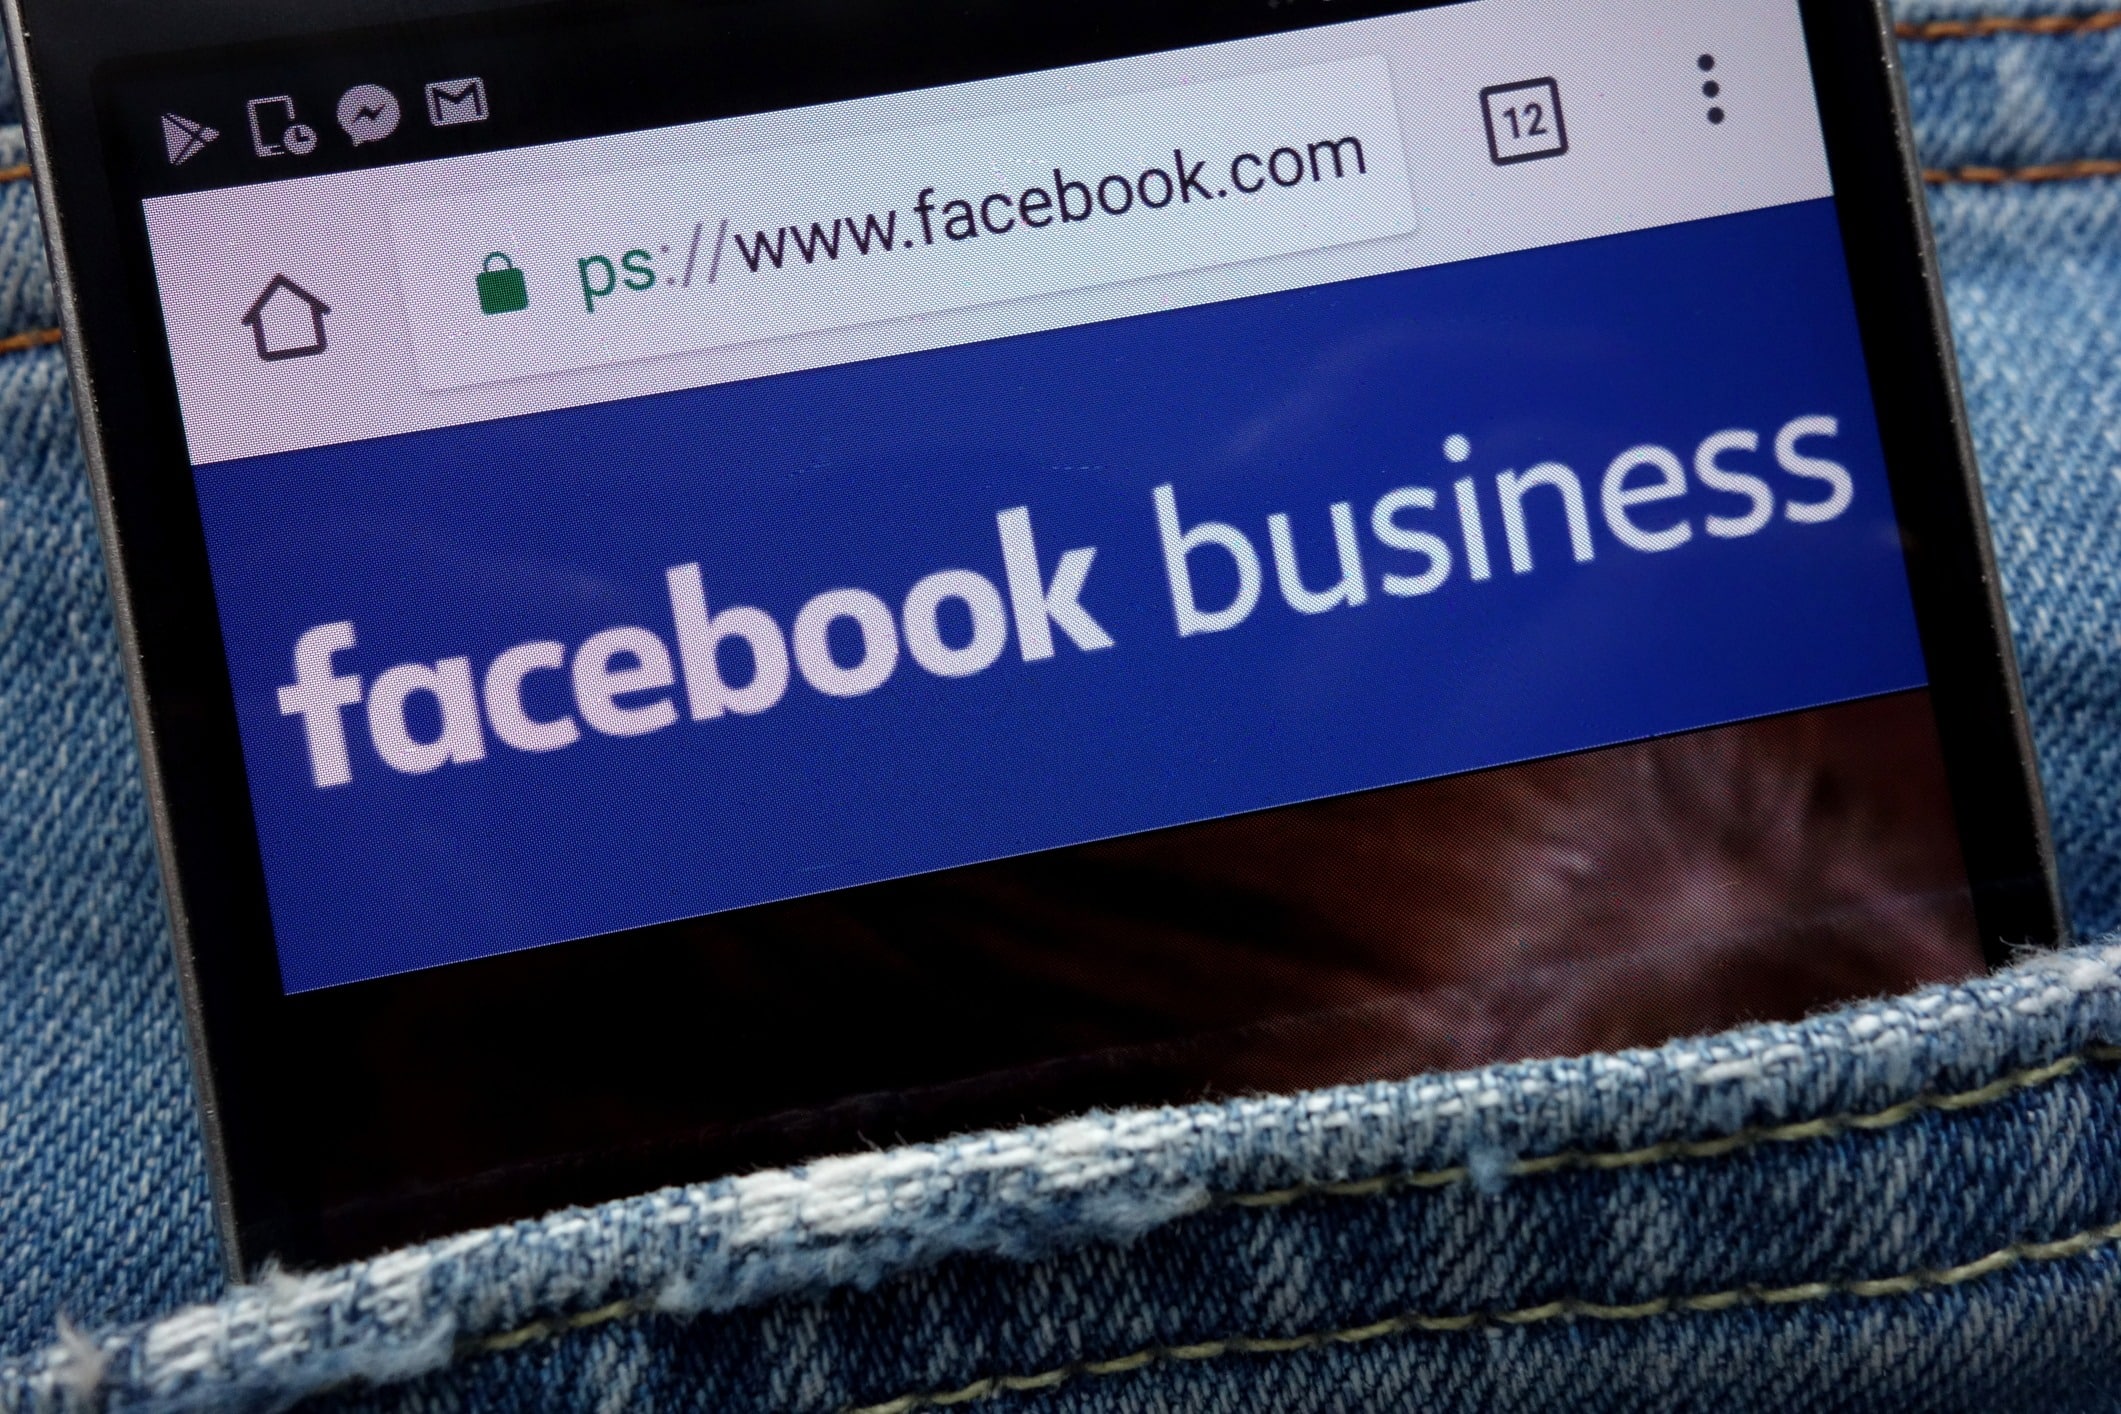 Facebook business website displayed on android phone